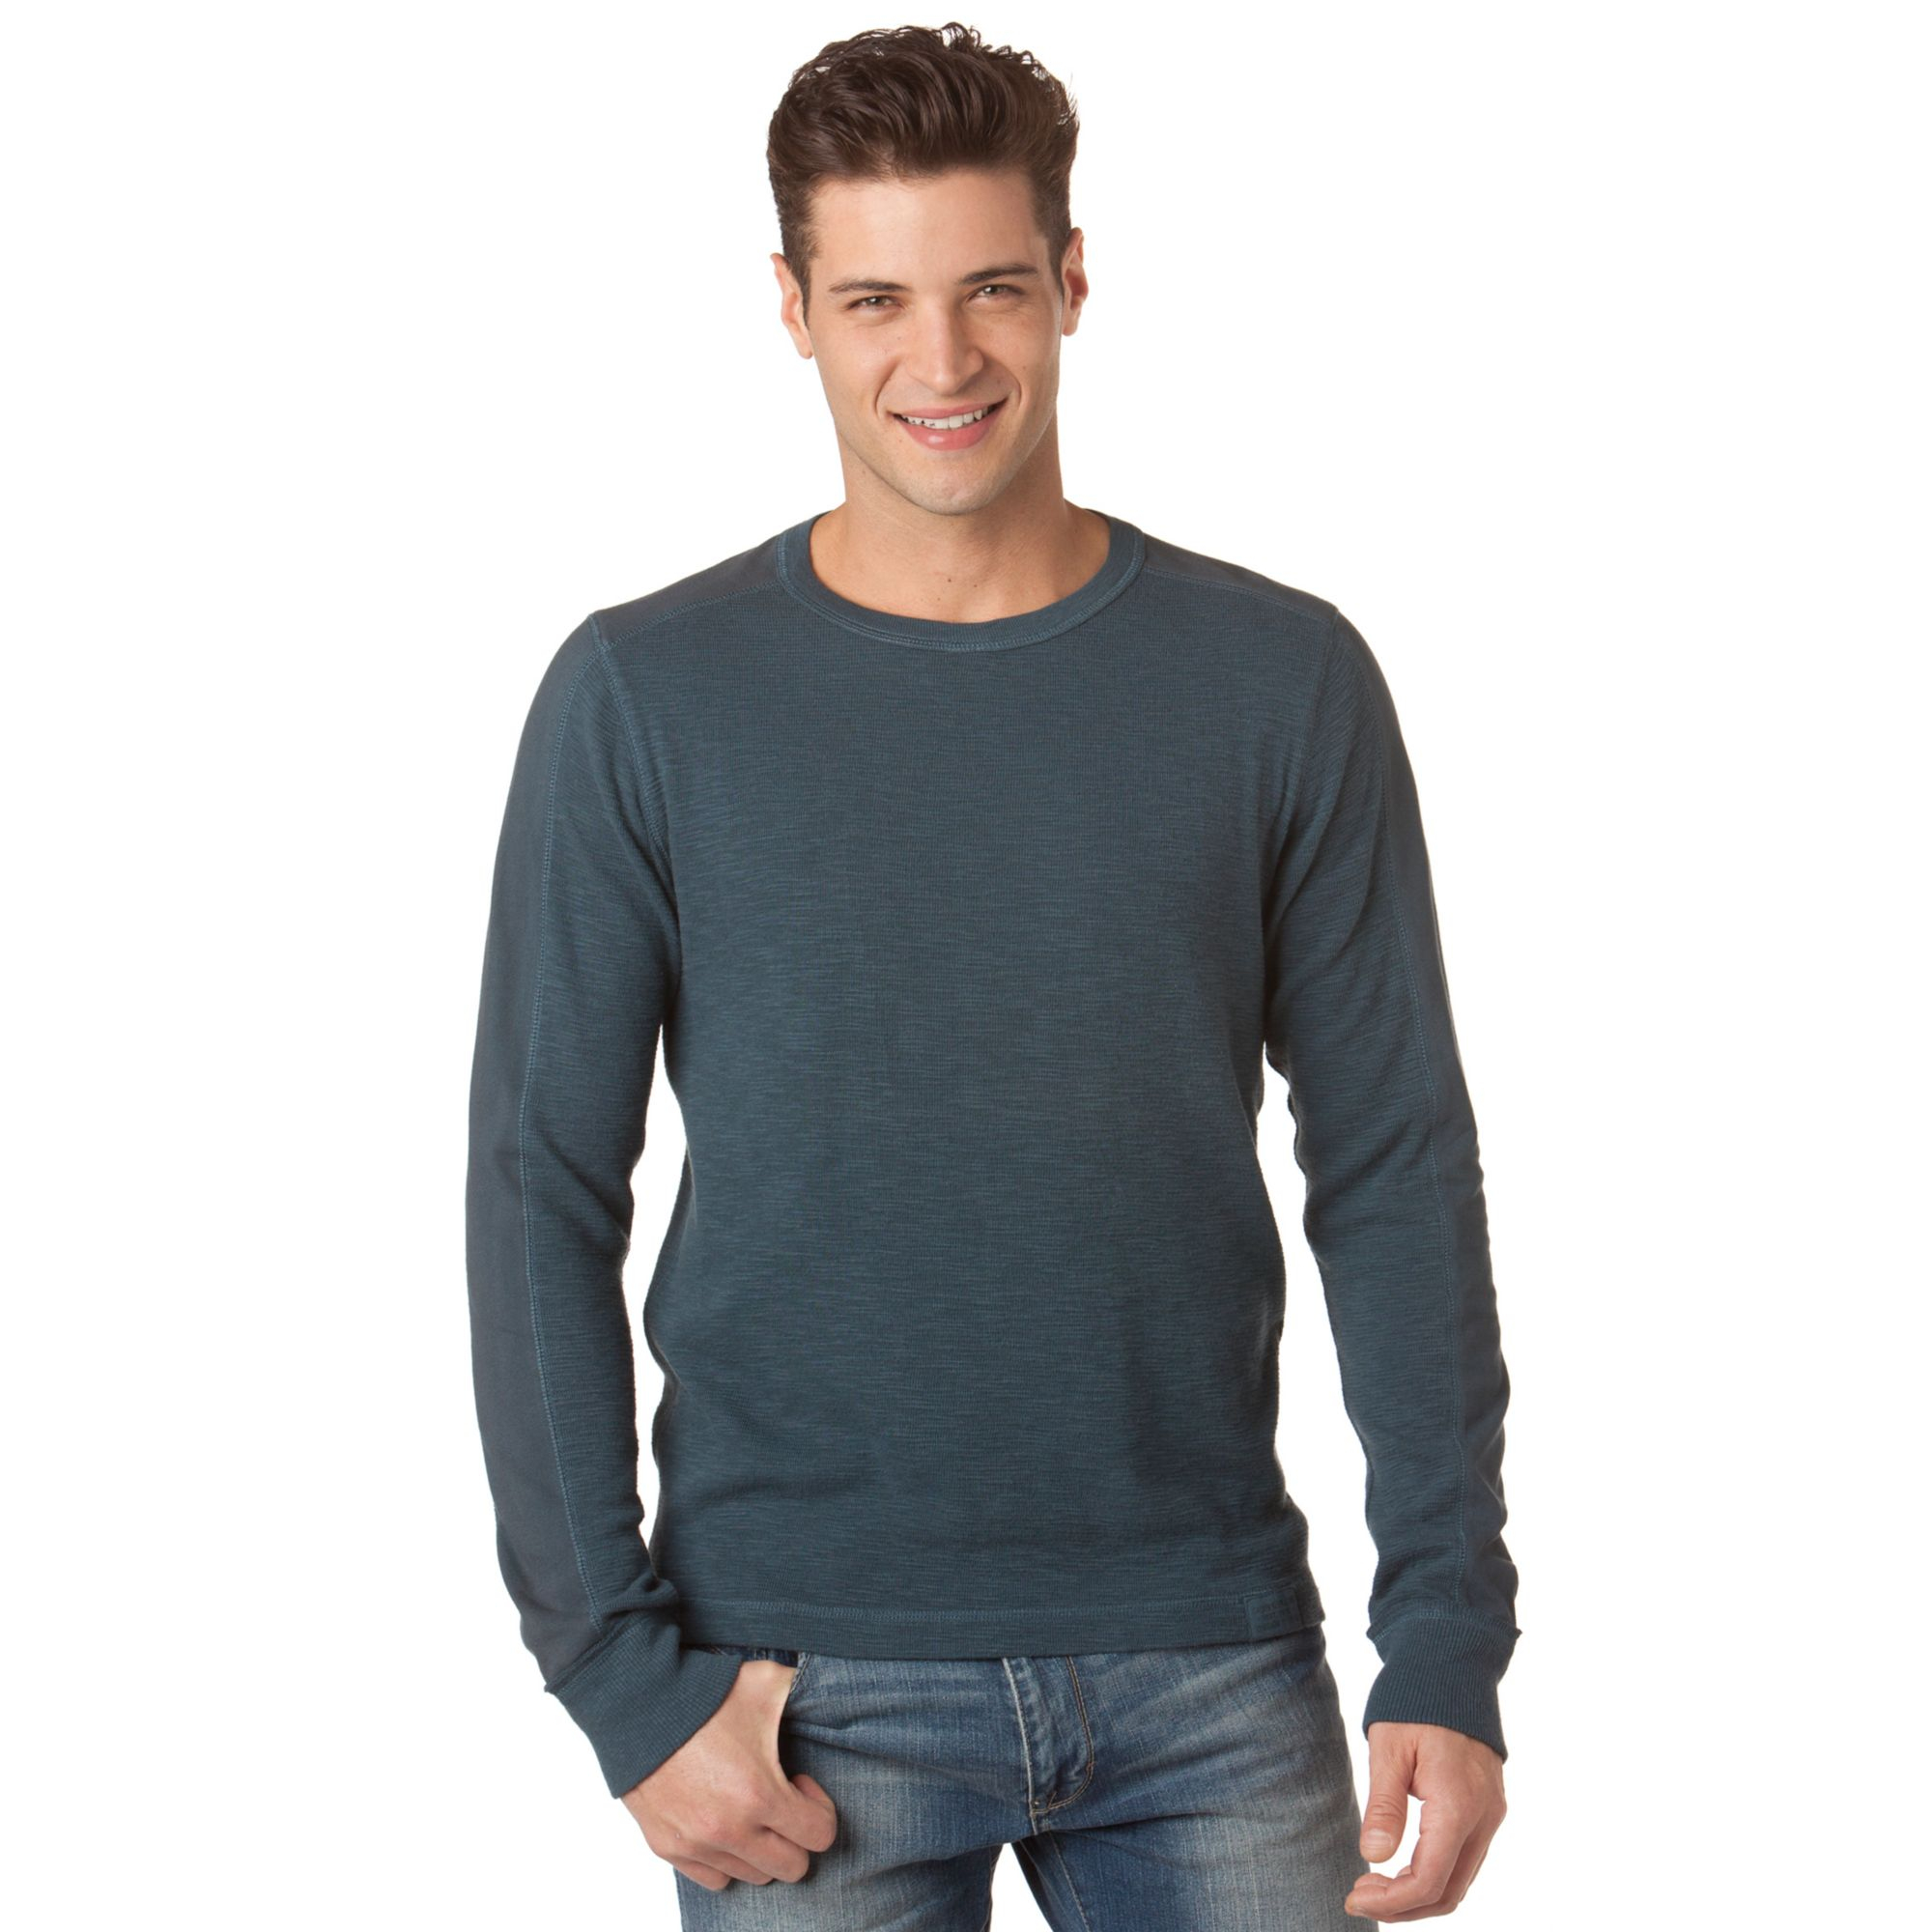 Lyst - Calvin klein jeans Thermal Long Sleeve Tshirt in Blue for Men